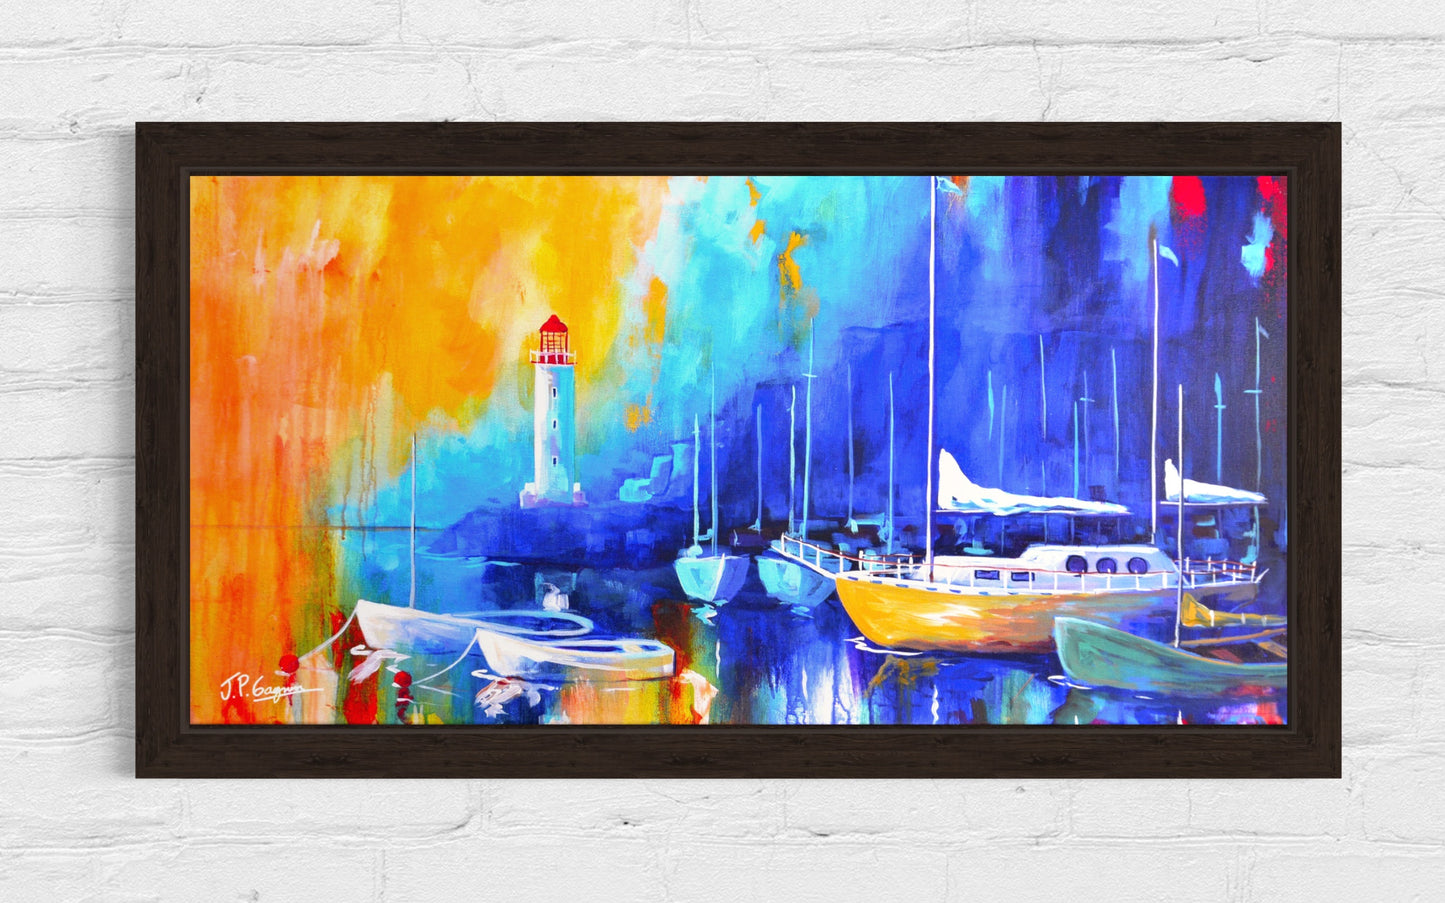 Reproduction on canvas, Sailboat and lighthouse